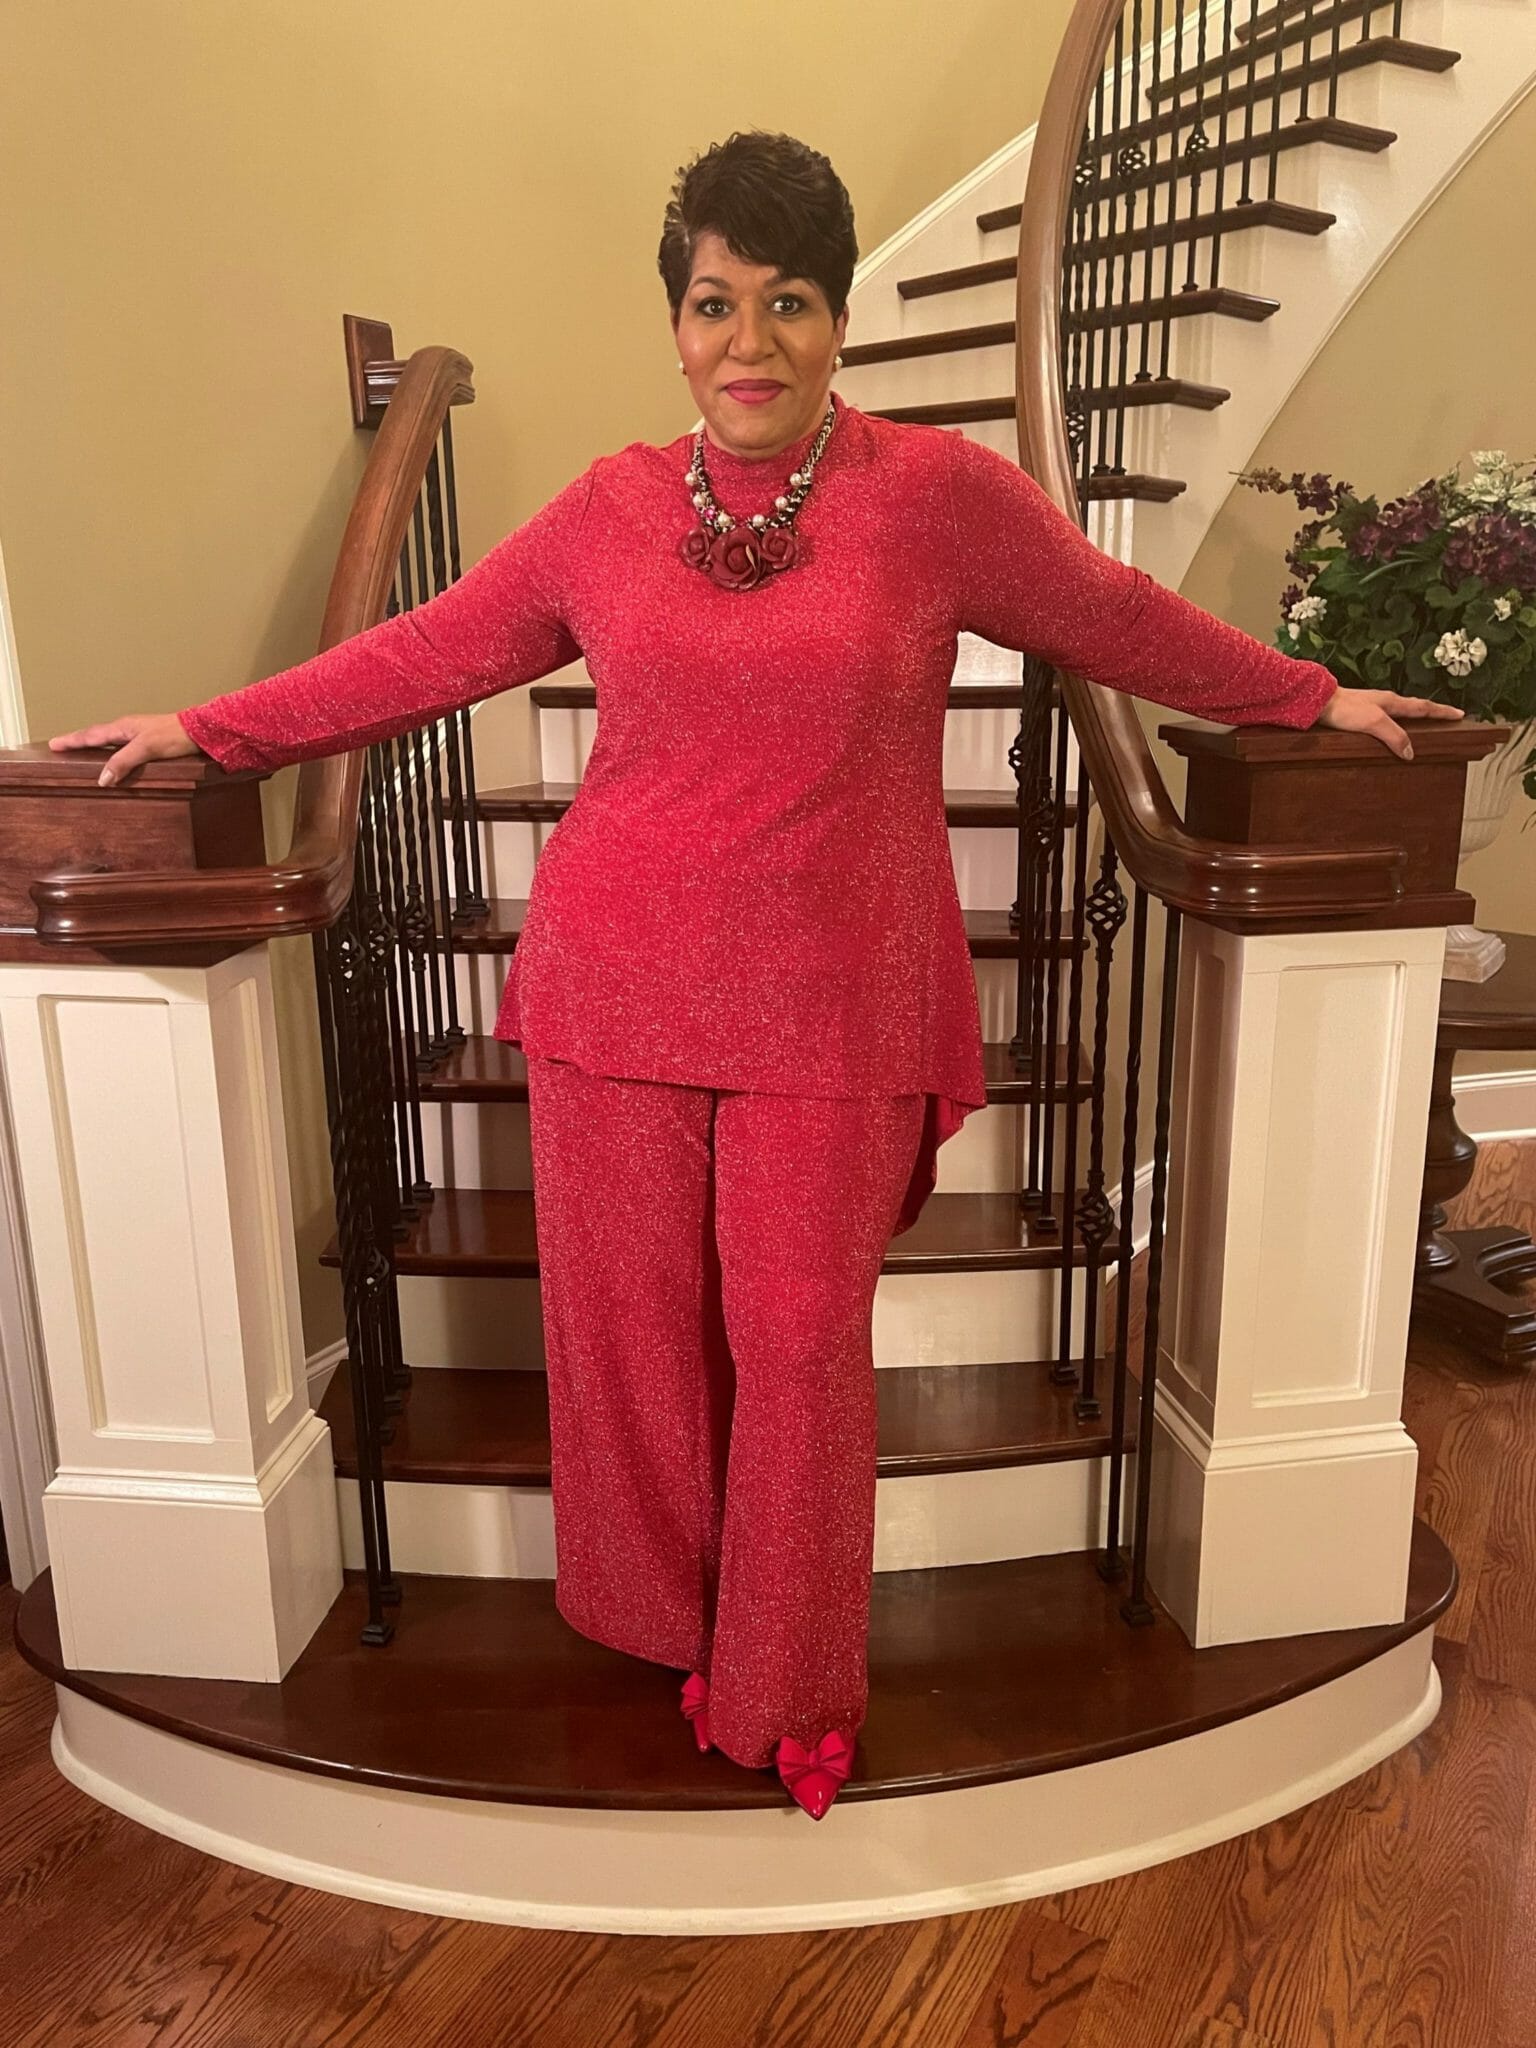 Ashro customer wearing a sparkly red pant suit posing on a stair well